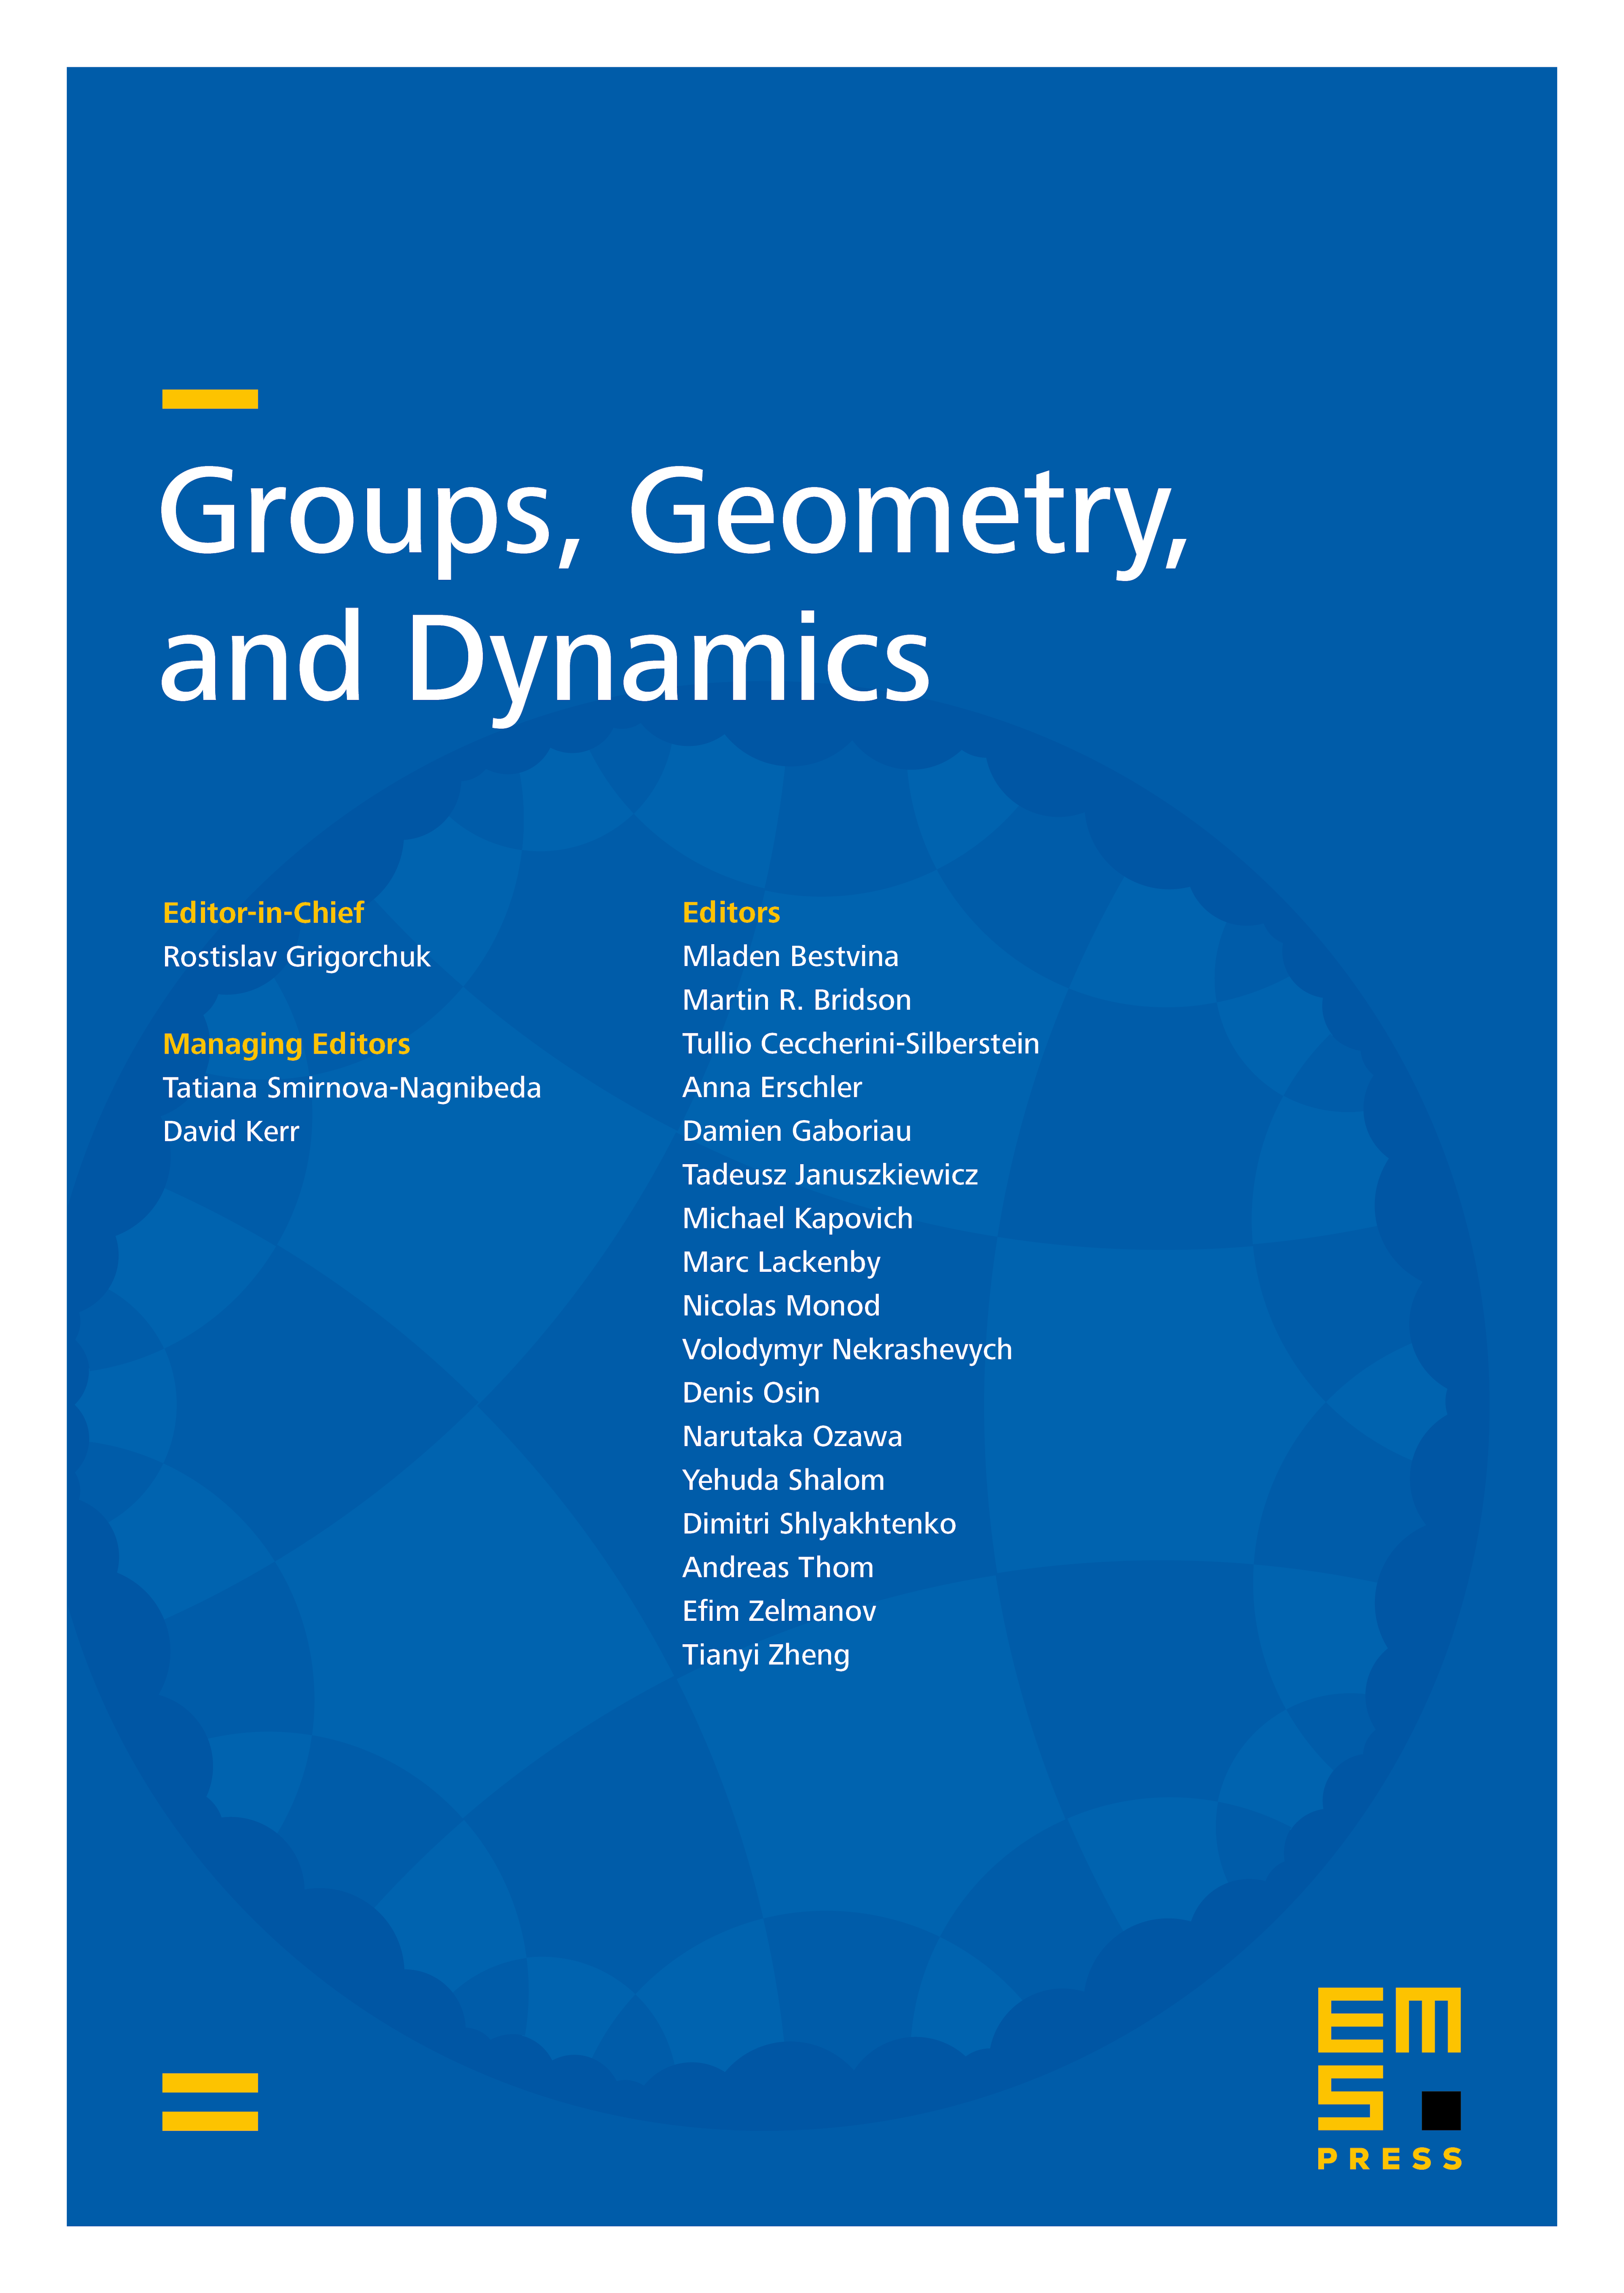 Geometric two-dimensional duality groups cover